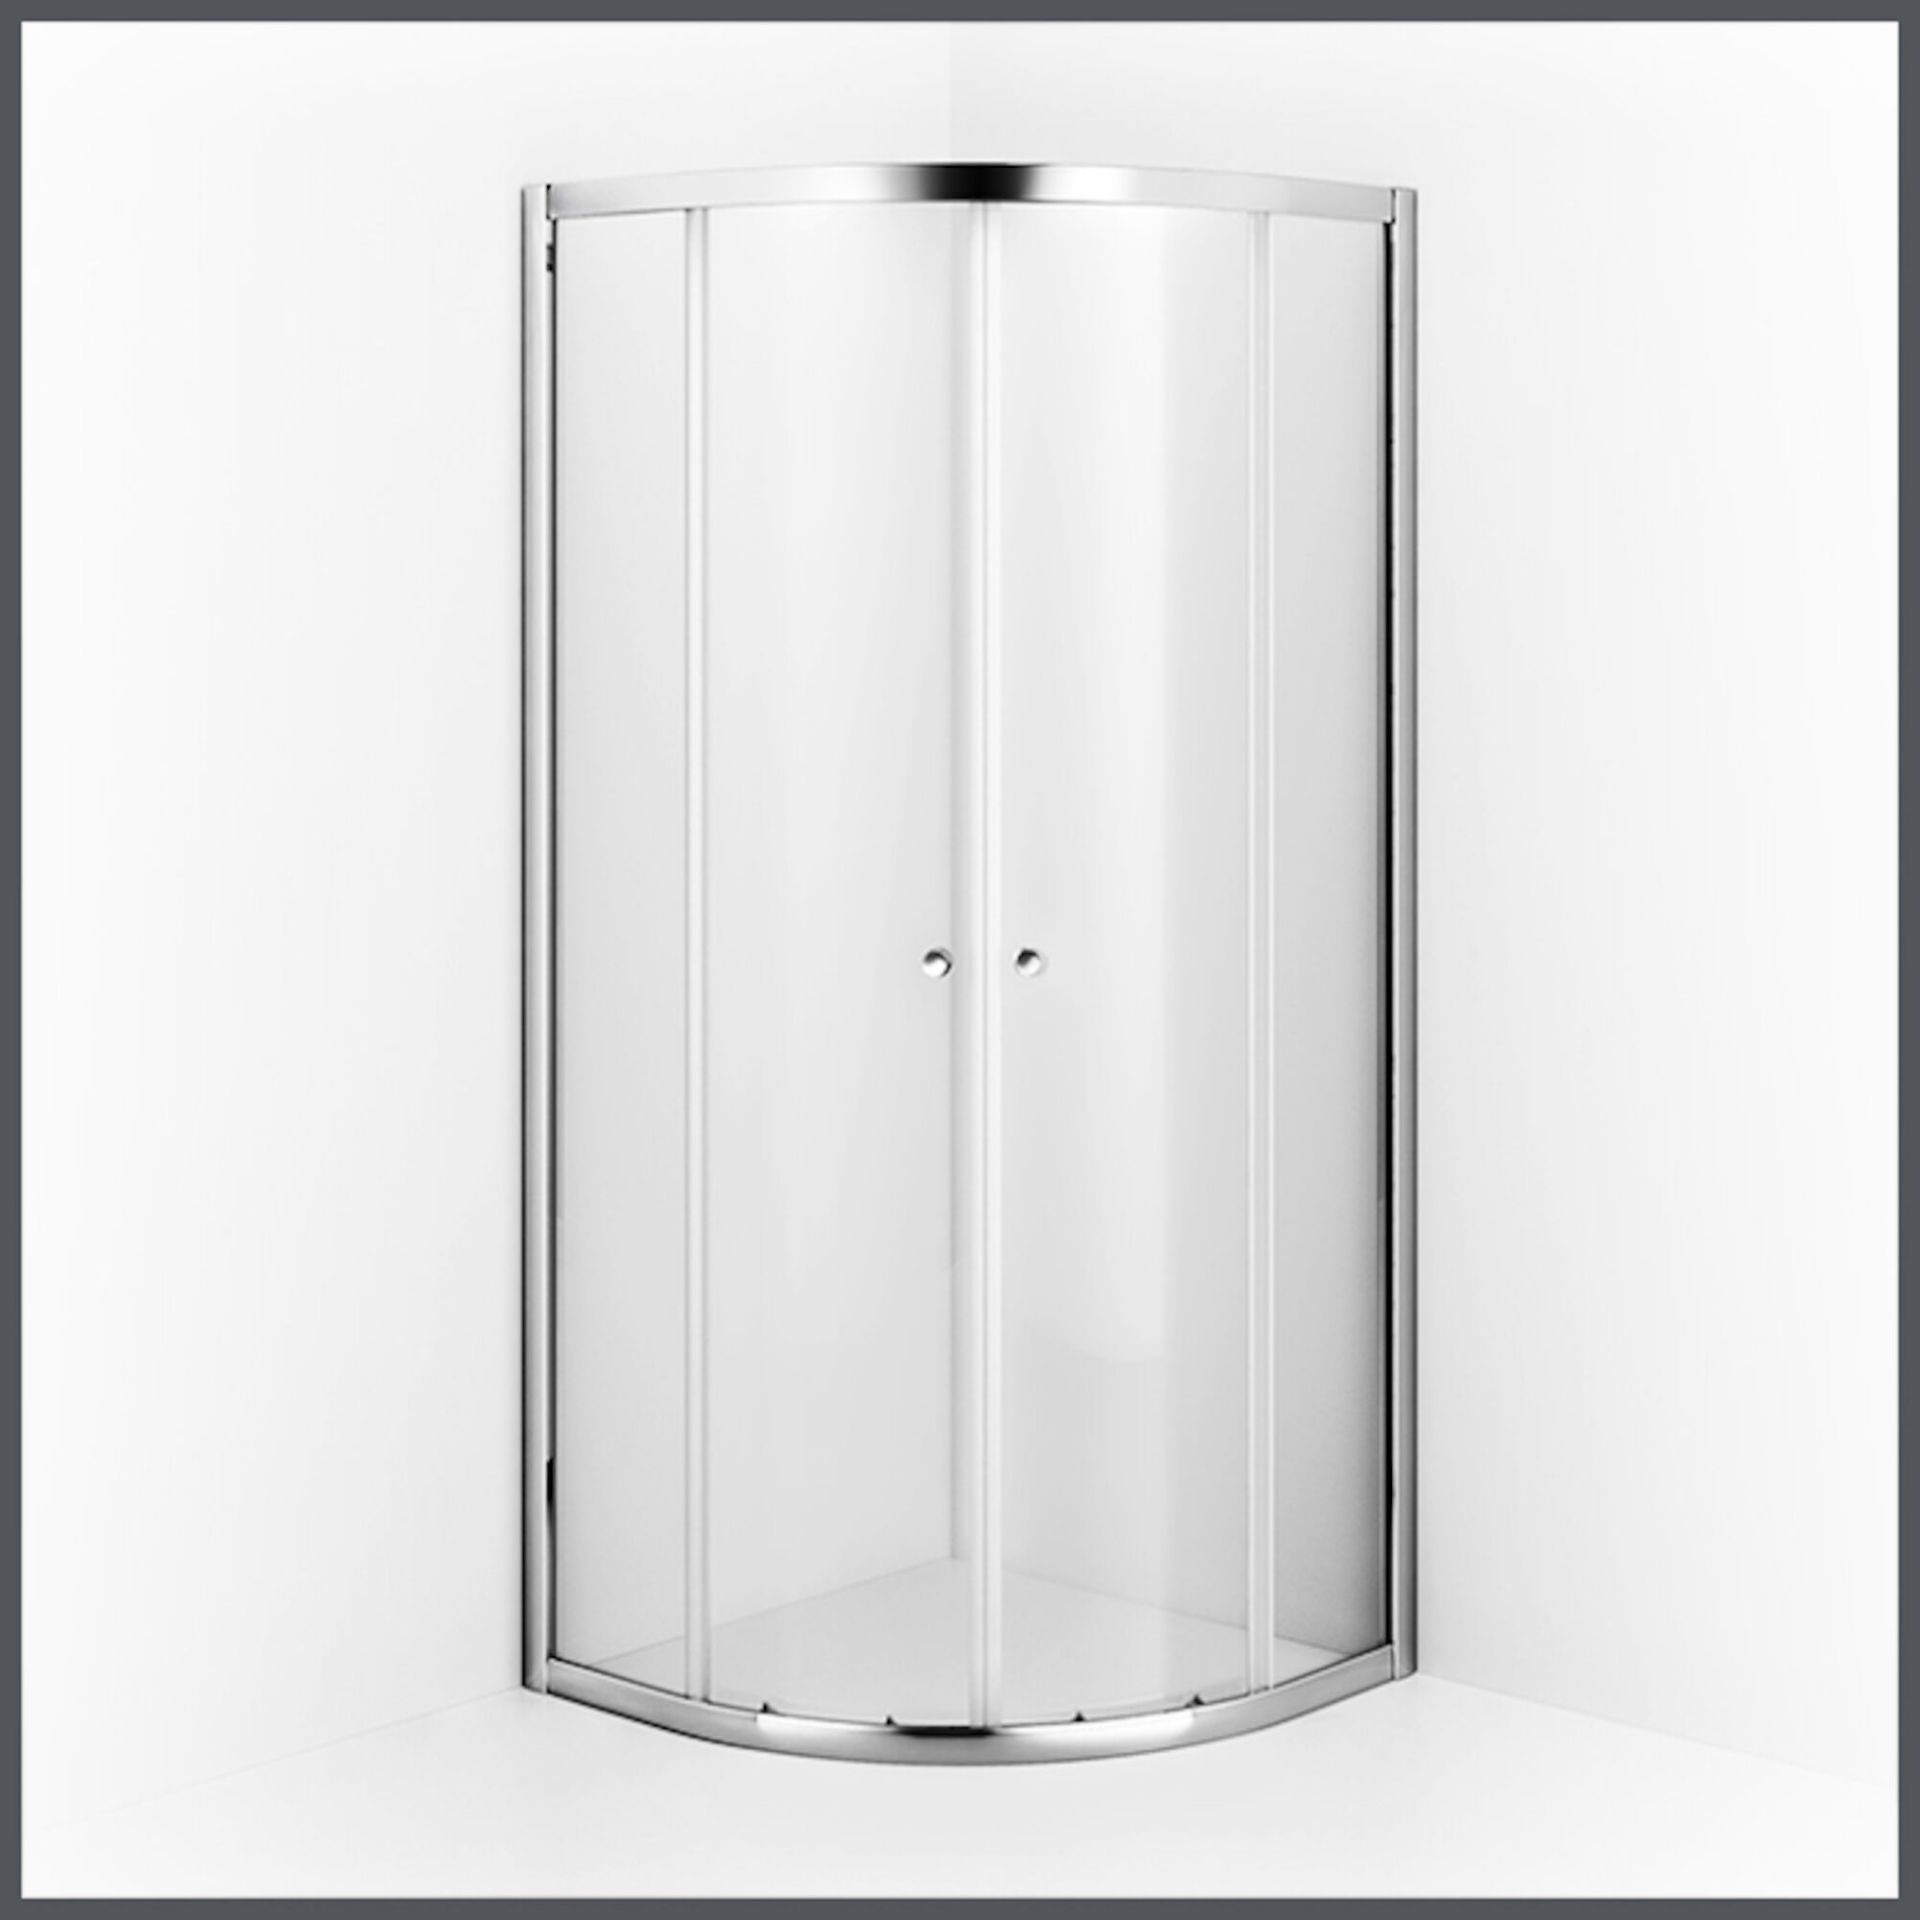 (H98) 800x800mm Quadrant Shower Enclosure. RRP £296.99. constructed of 4mm lightweight safet...